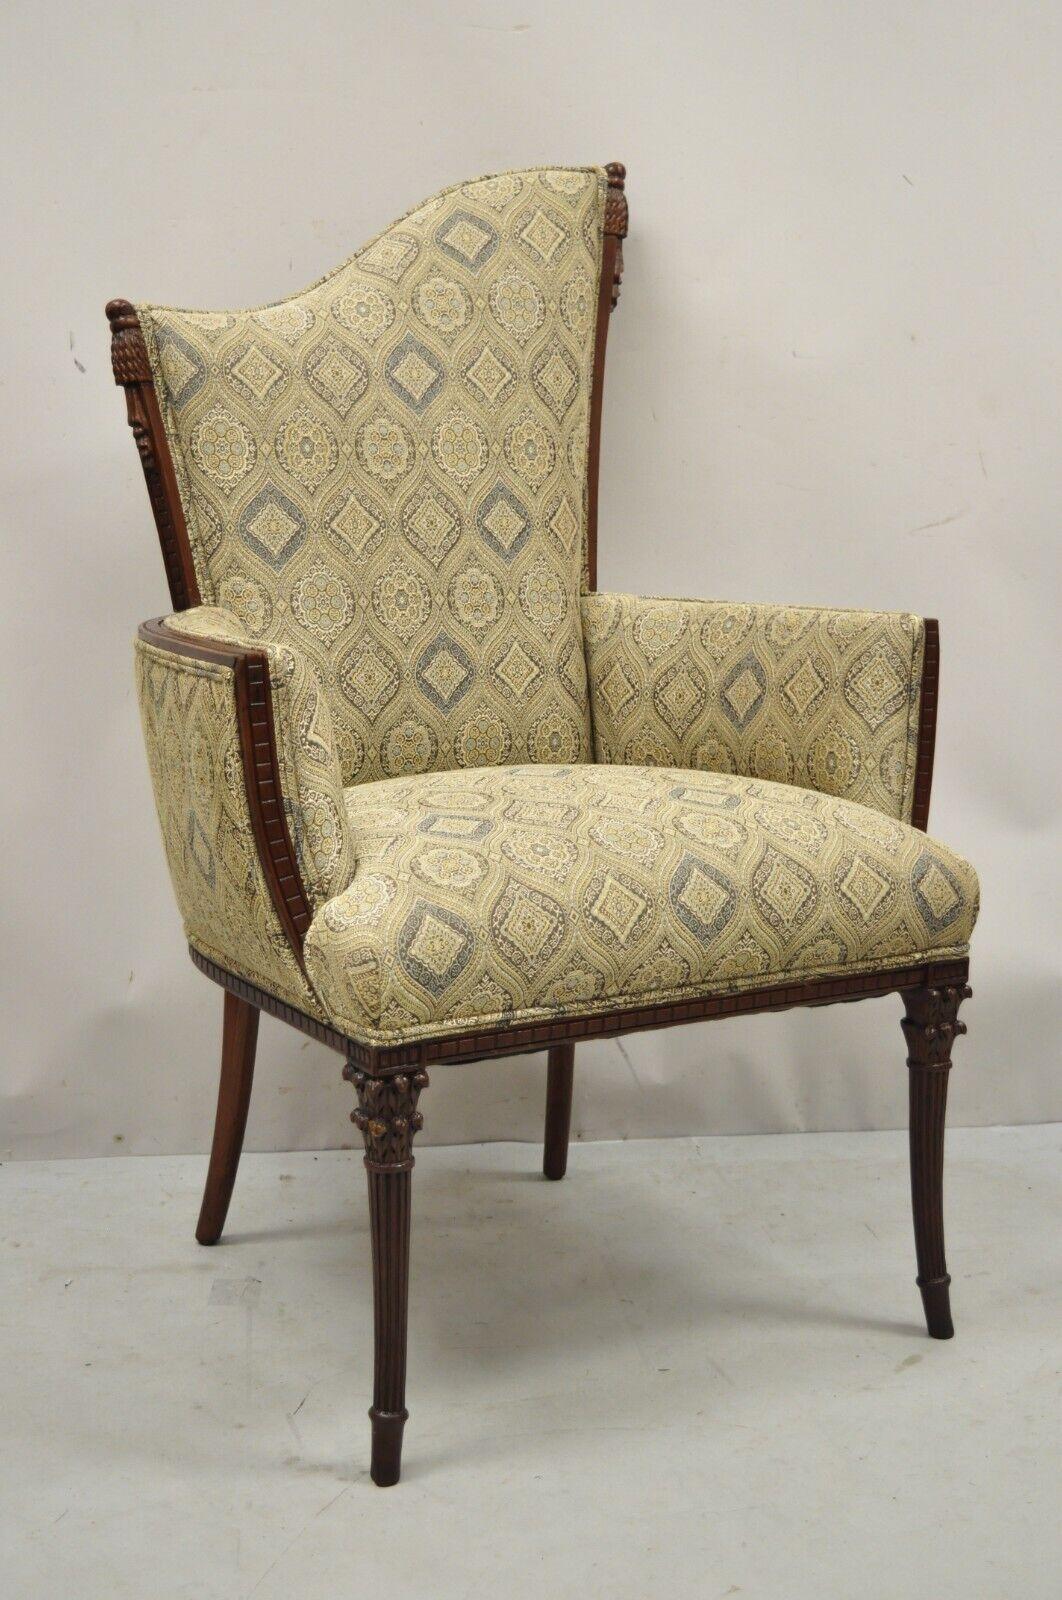 Vintage Hollywood Regency French style angled back mahogany fireside lounge chair. Item should be reupholstered, current fabric has cat smell. Item features a solid wood frame, nicely carved details, tapered legs, great style and form. Circa early